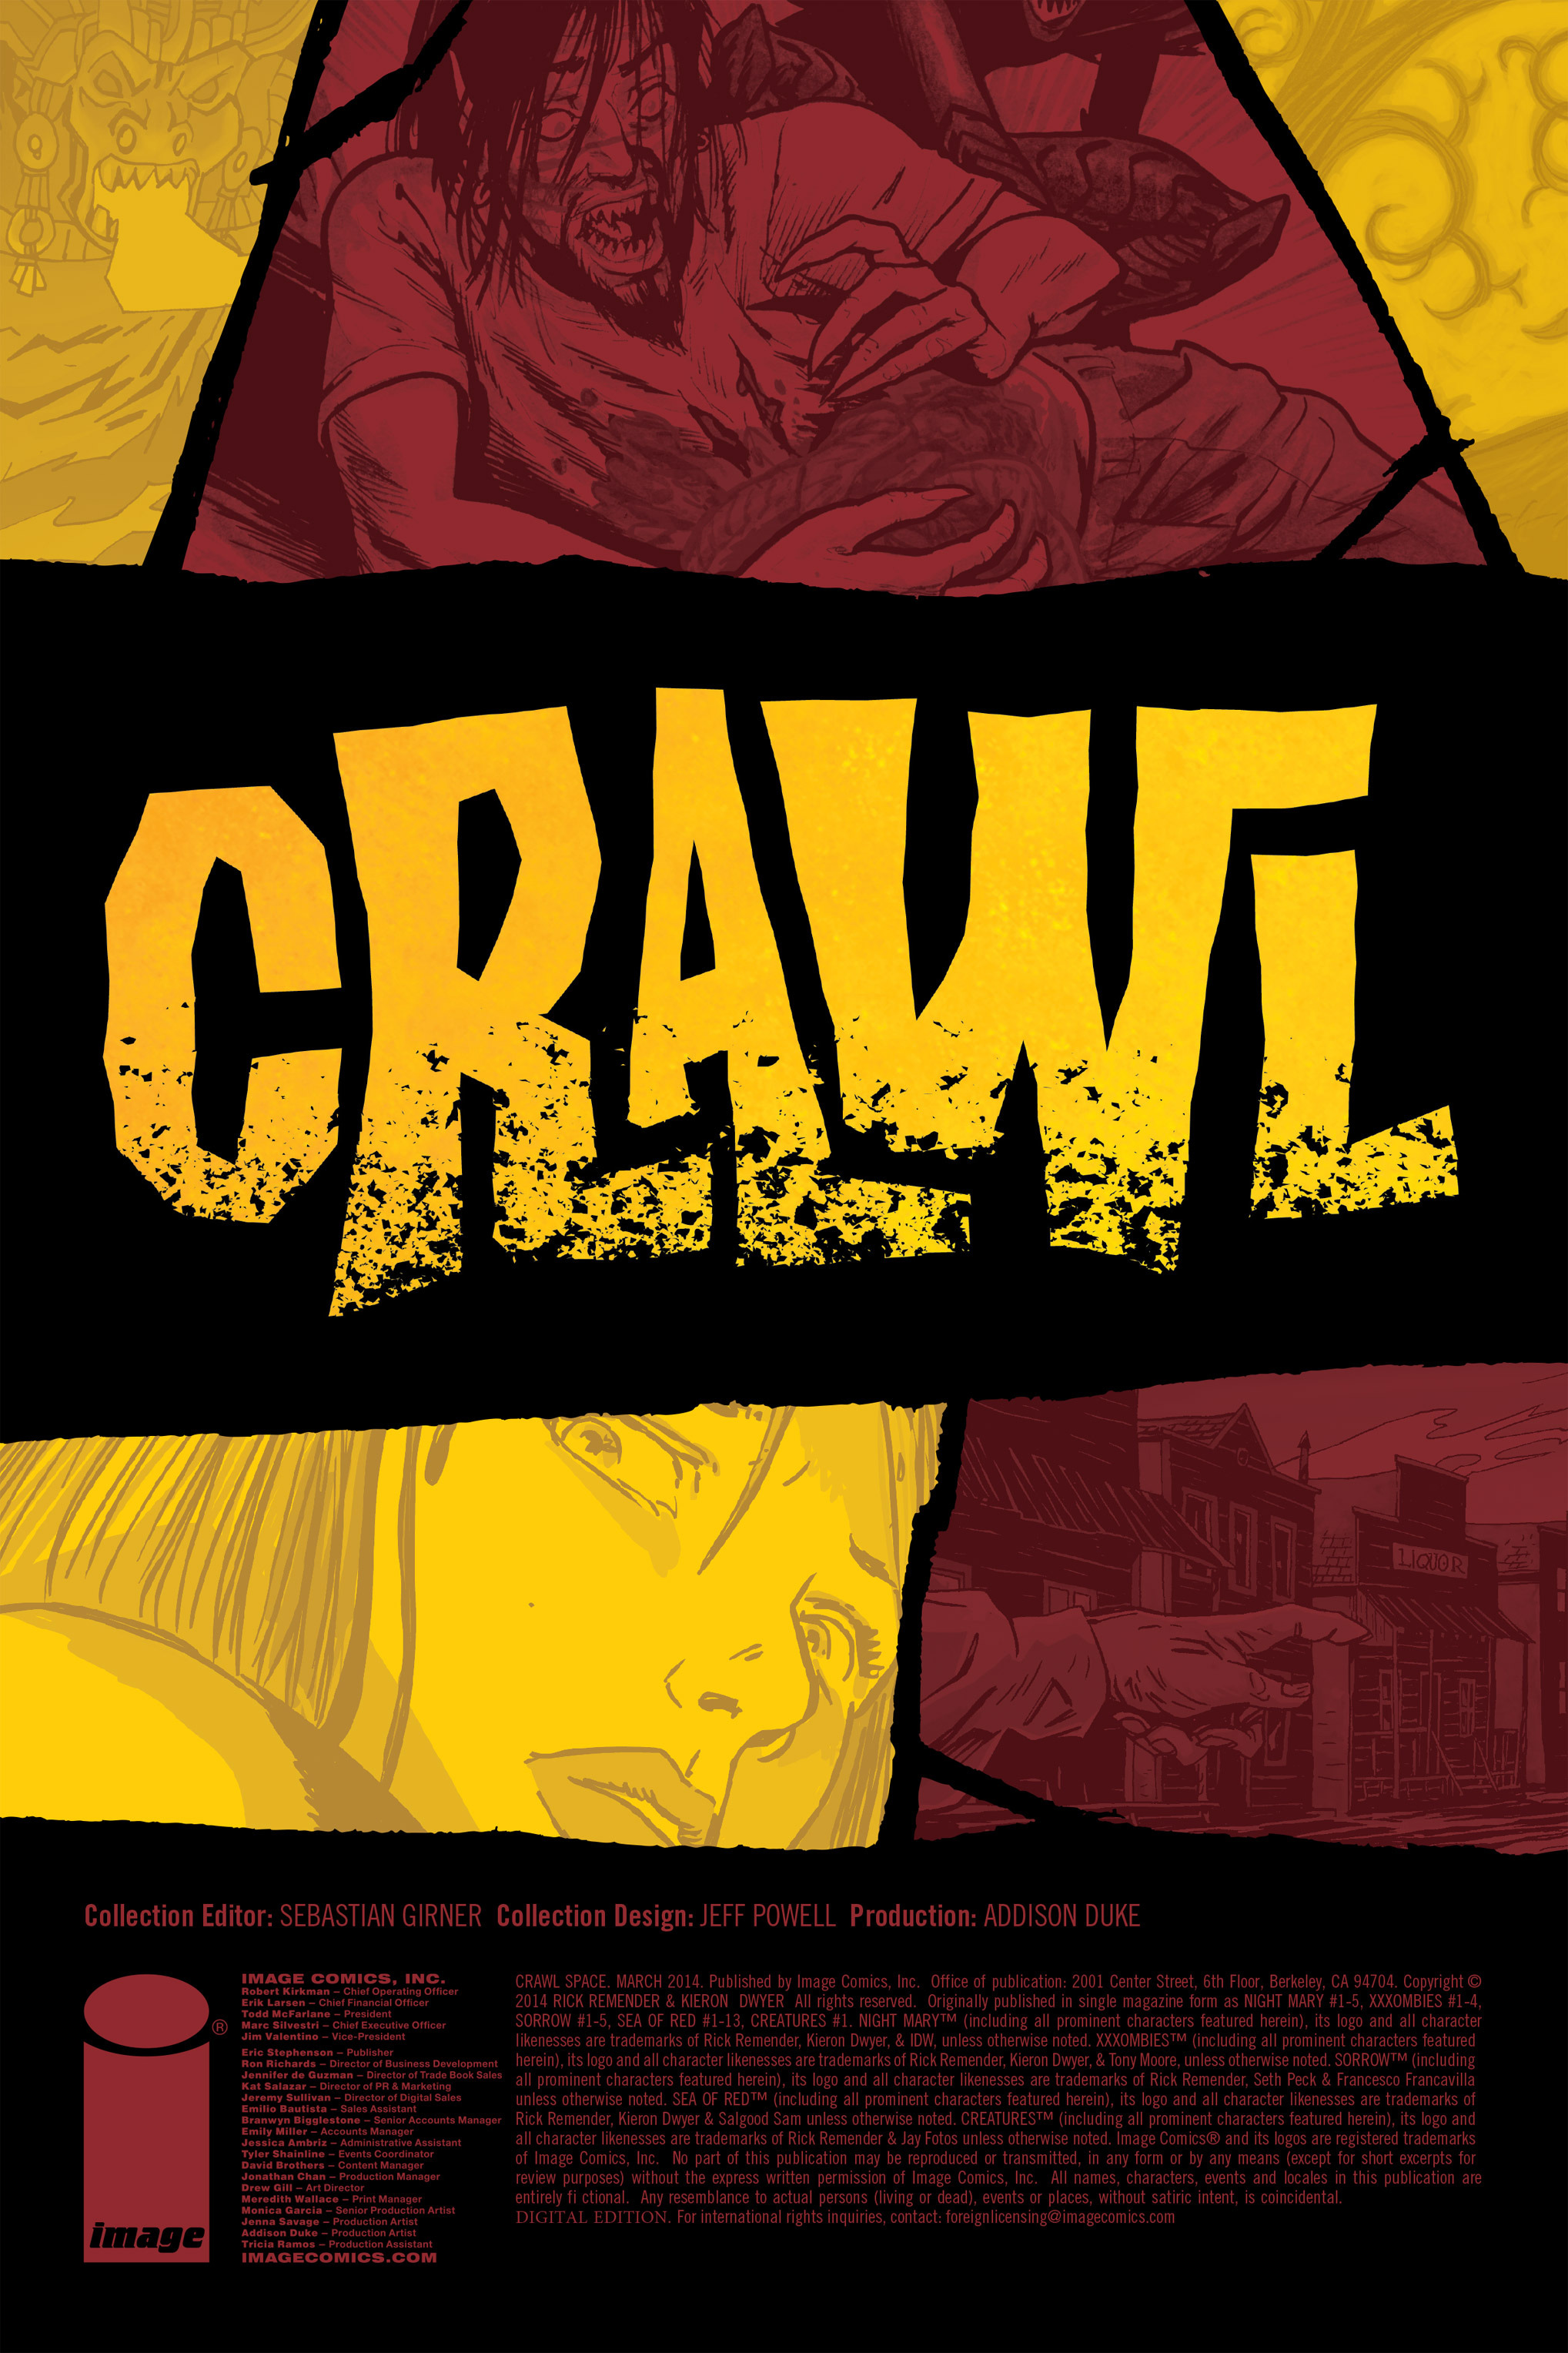 Read online Crawl Space comic -  Issue # TPB 1 - 2